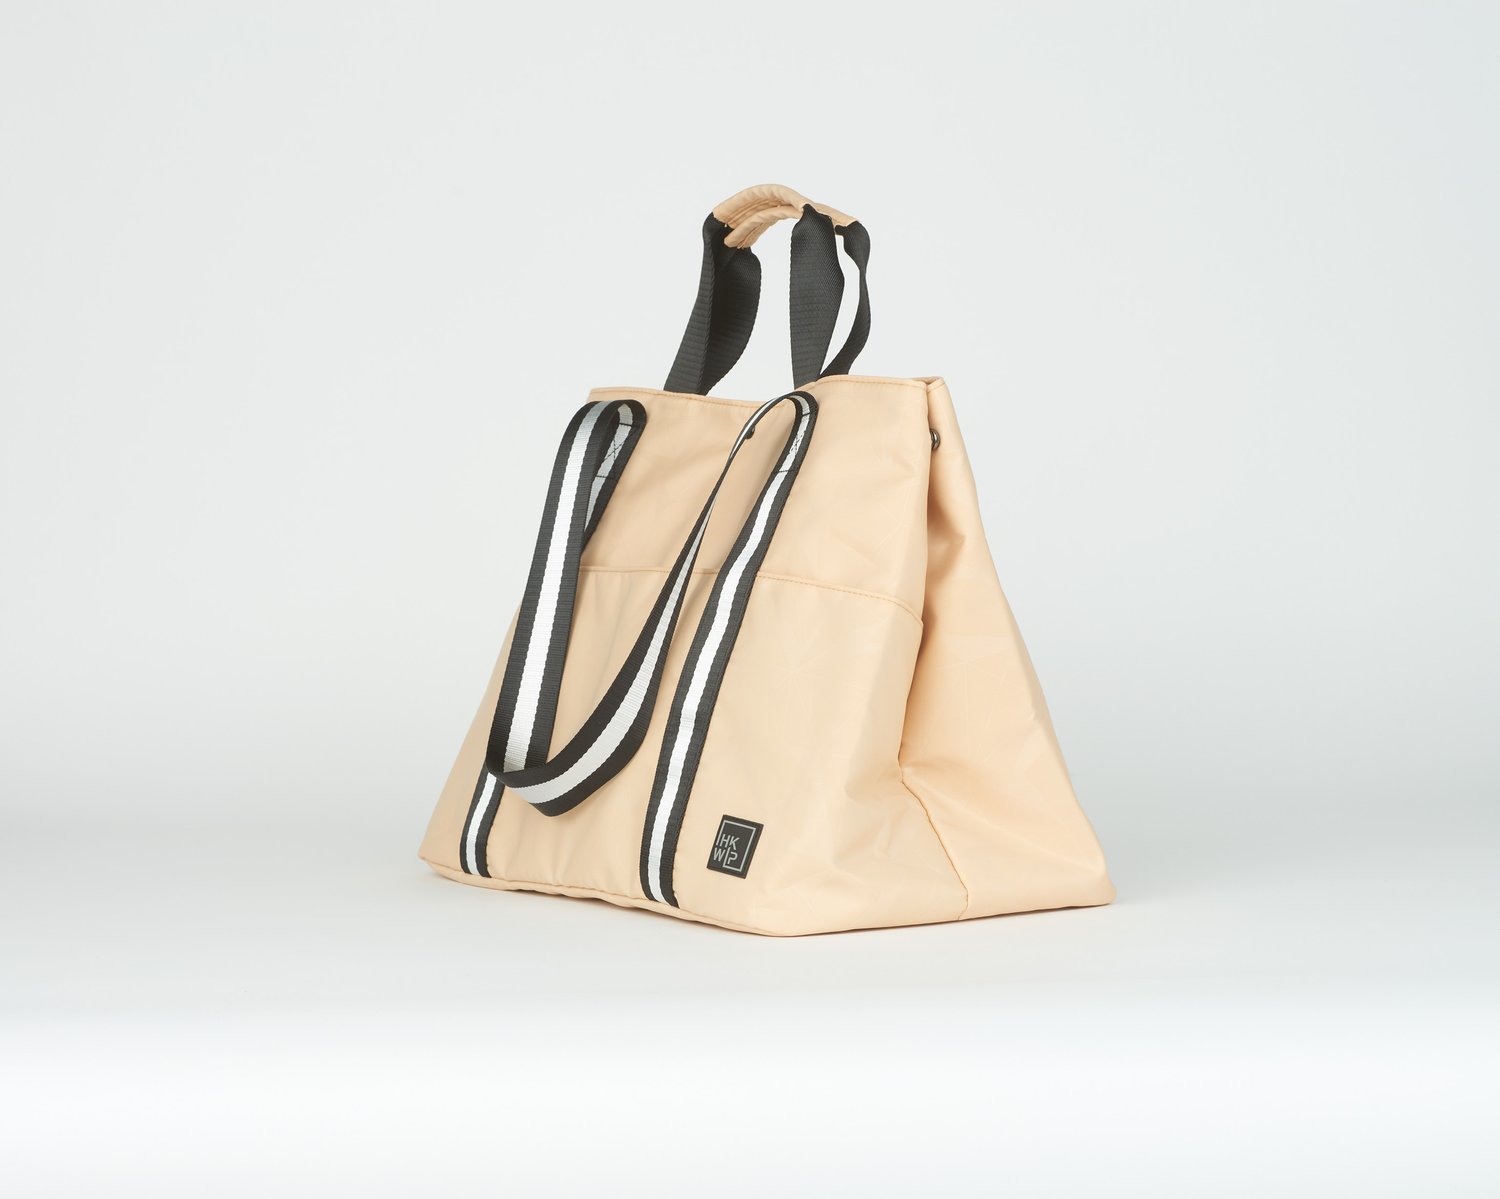 Save Khaki Men's Canvas Tote Bag in Navy | END. Clothing